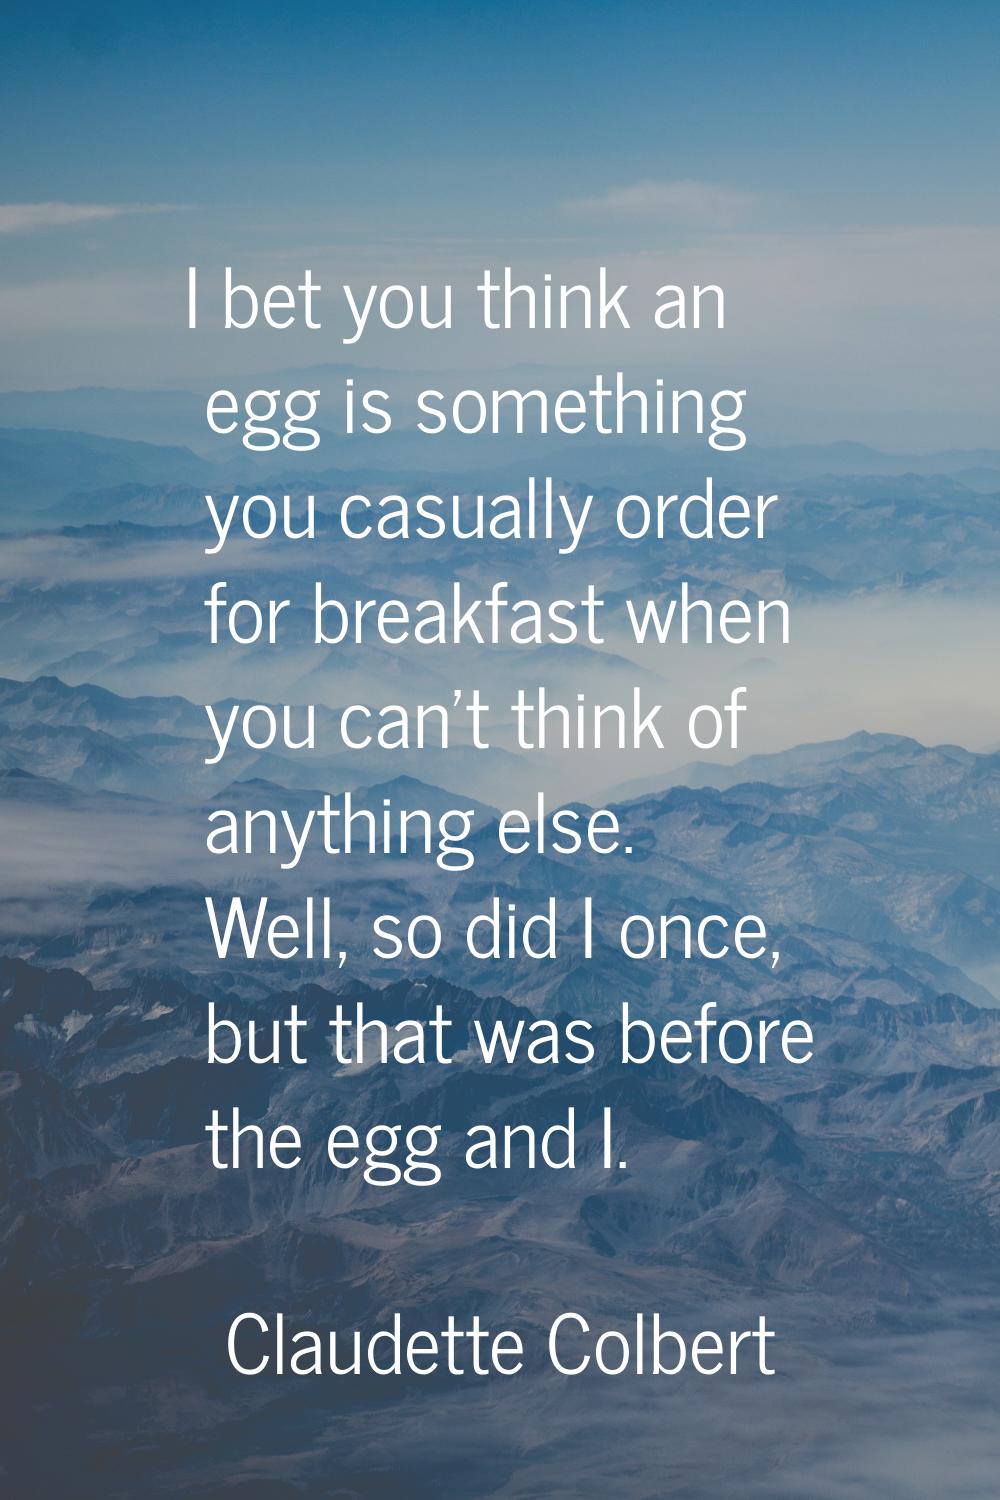 I bet you think an egg is something you casually order for breakfast when you can't think of anythi